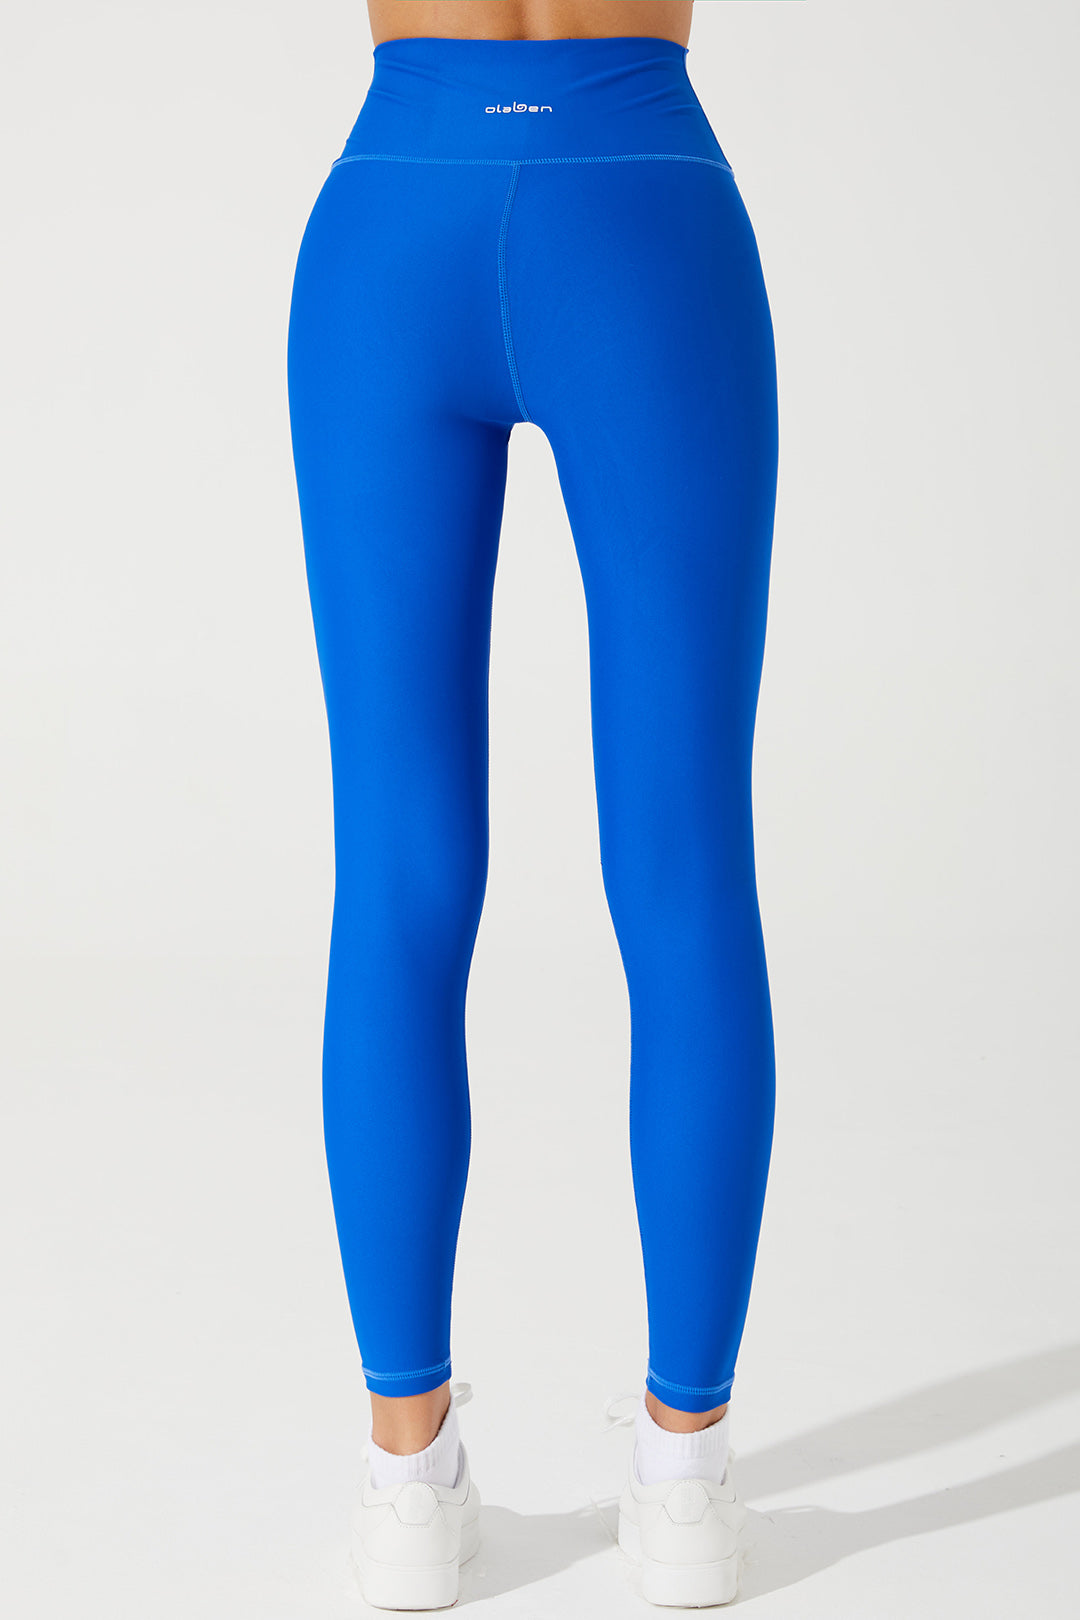 Stylish Atlantis Blue women's leggings with a unique design - perfect for any occasion.